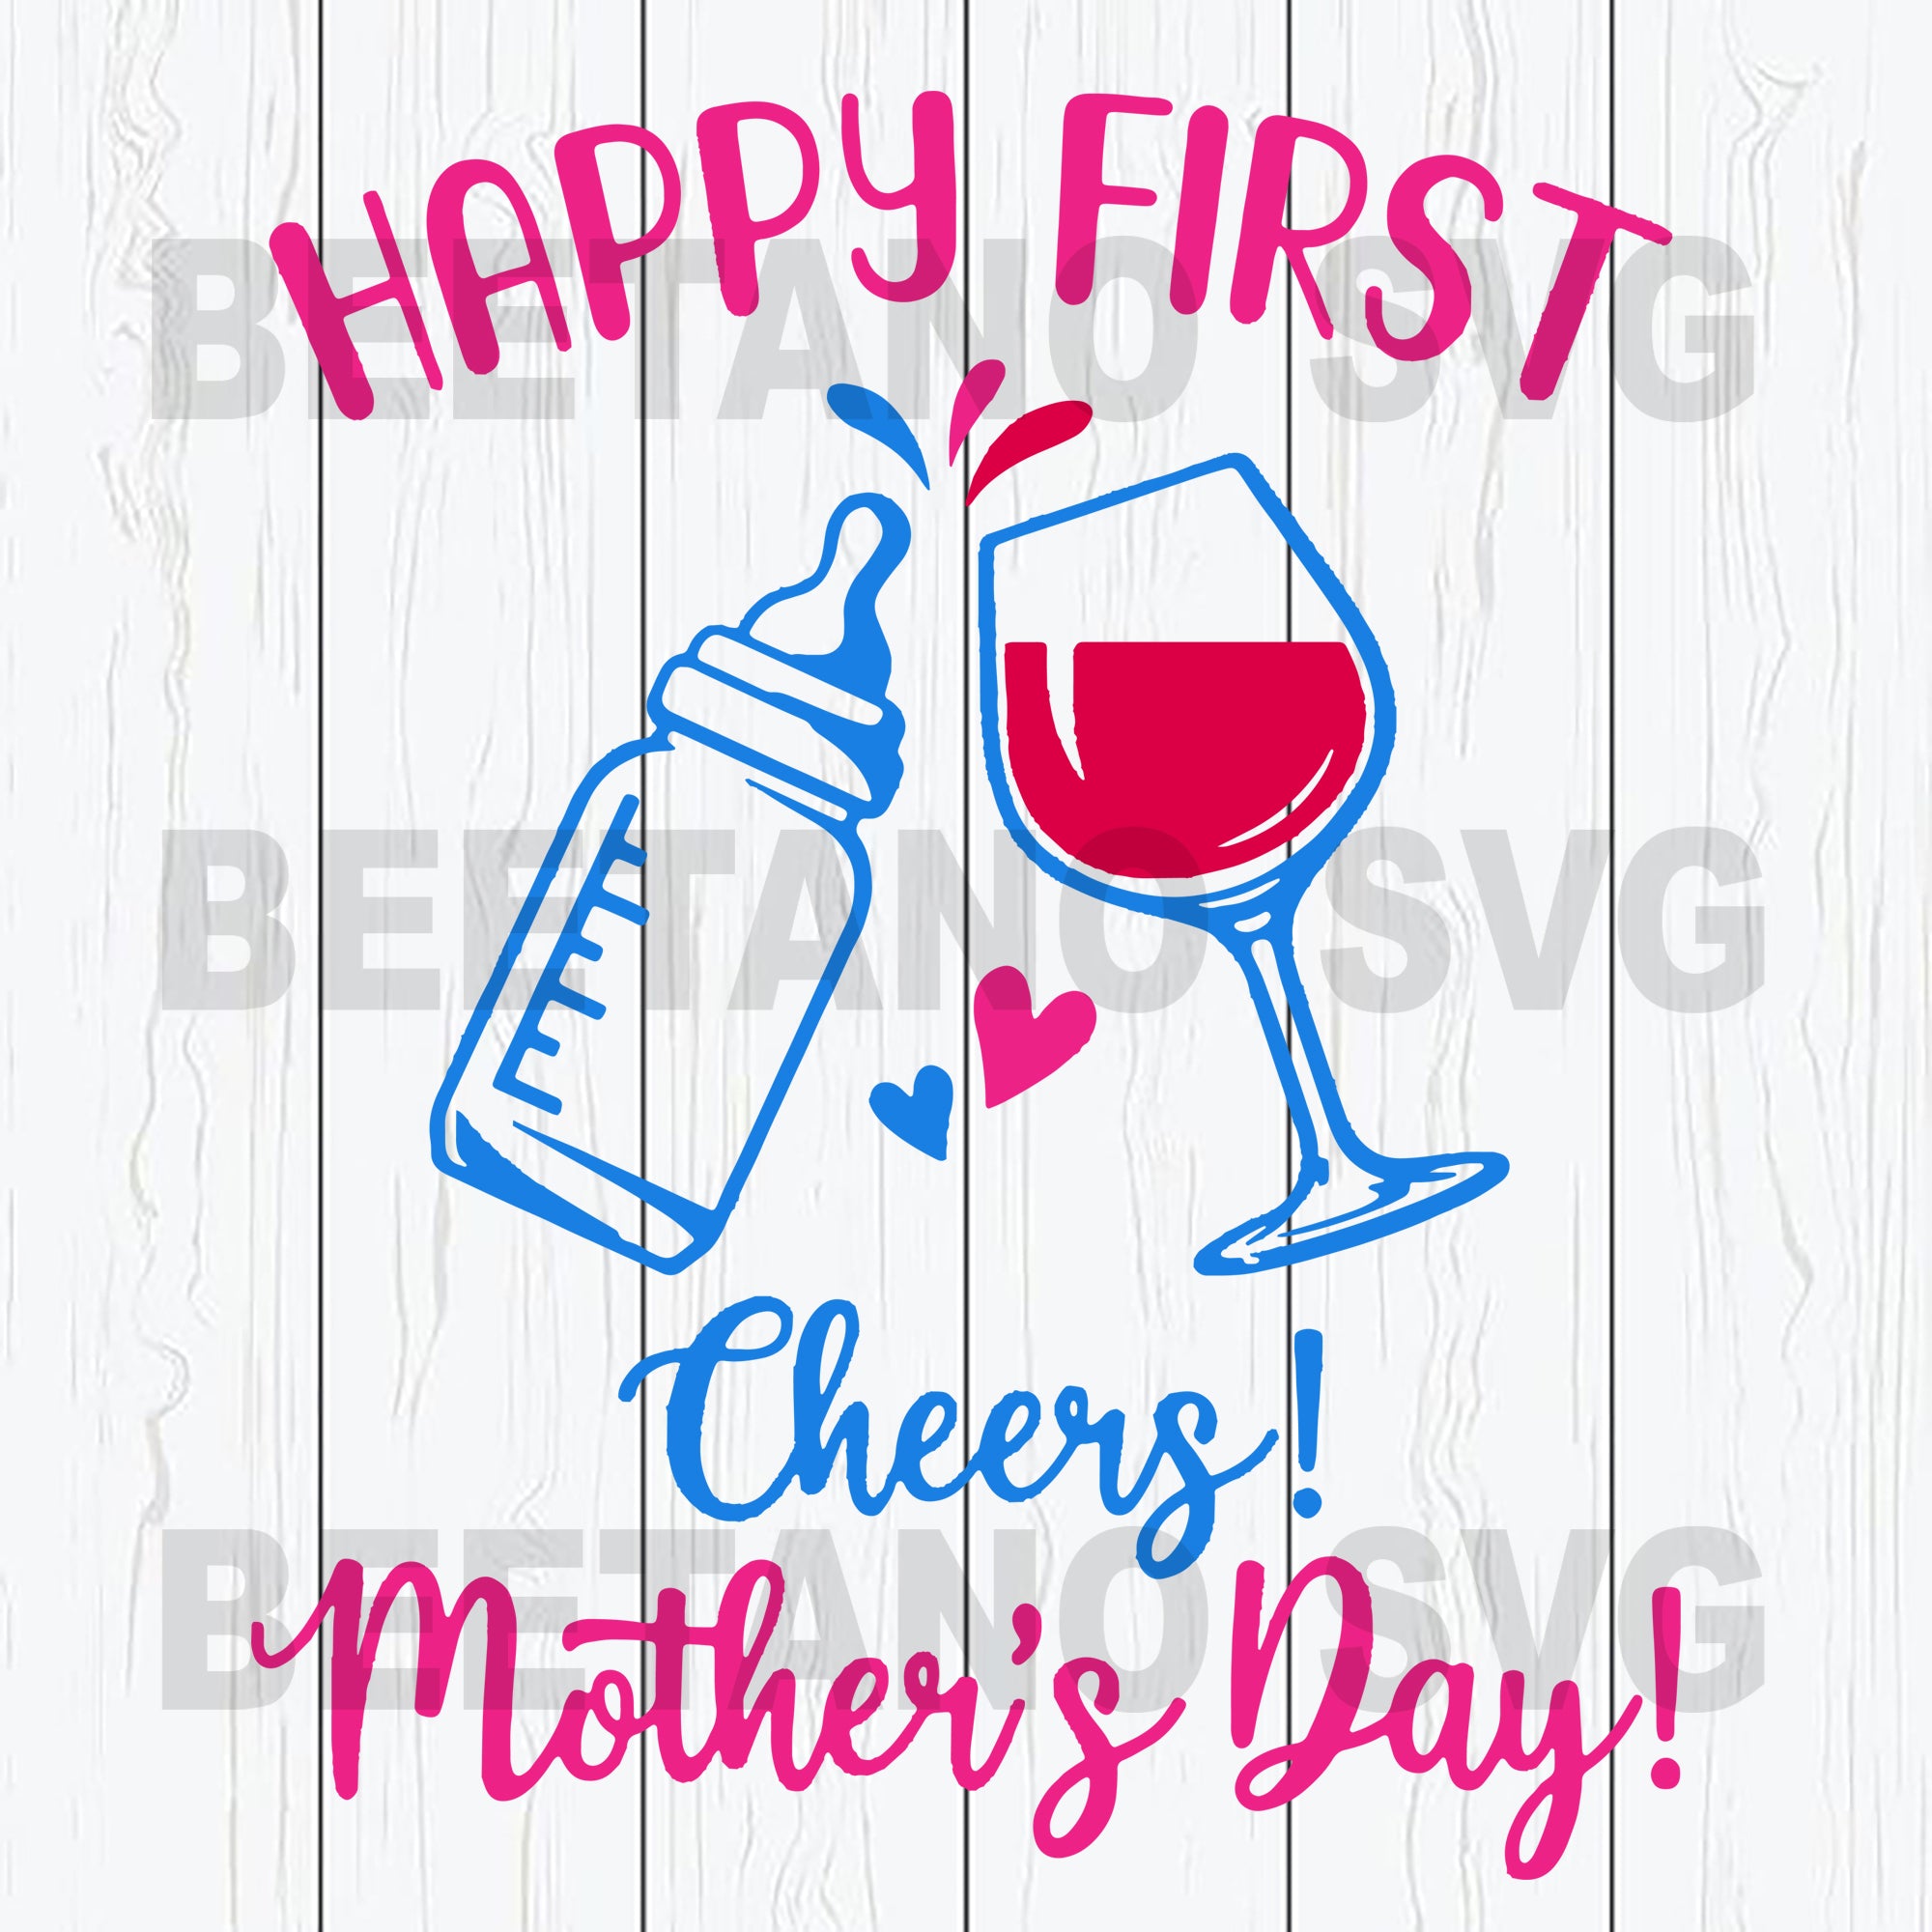 Download Happy First Cheers Mother S Day Svg Files Mother S Day Svg Files Beetanosvg Scalable Vector Graphics